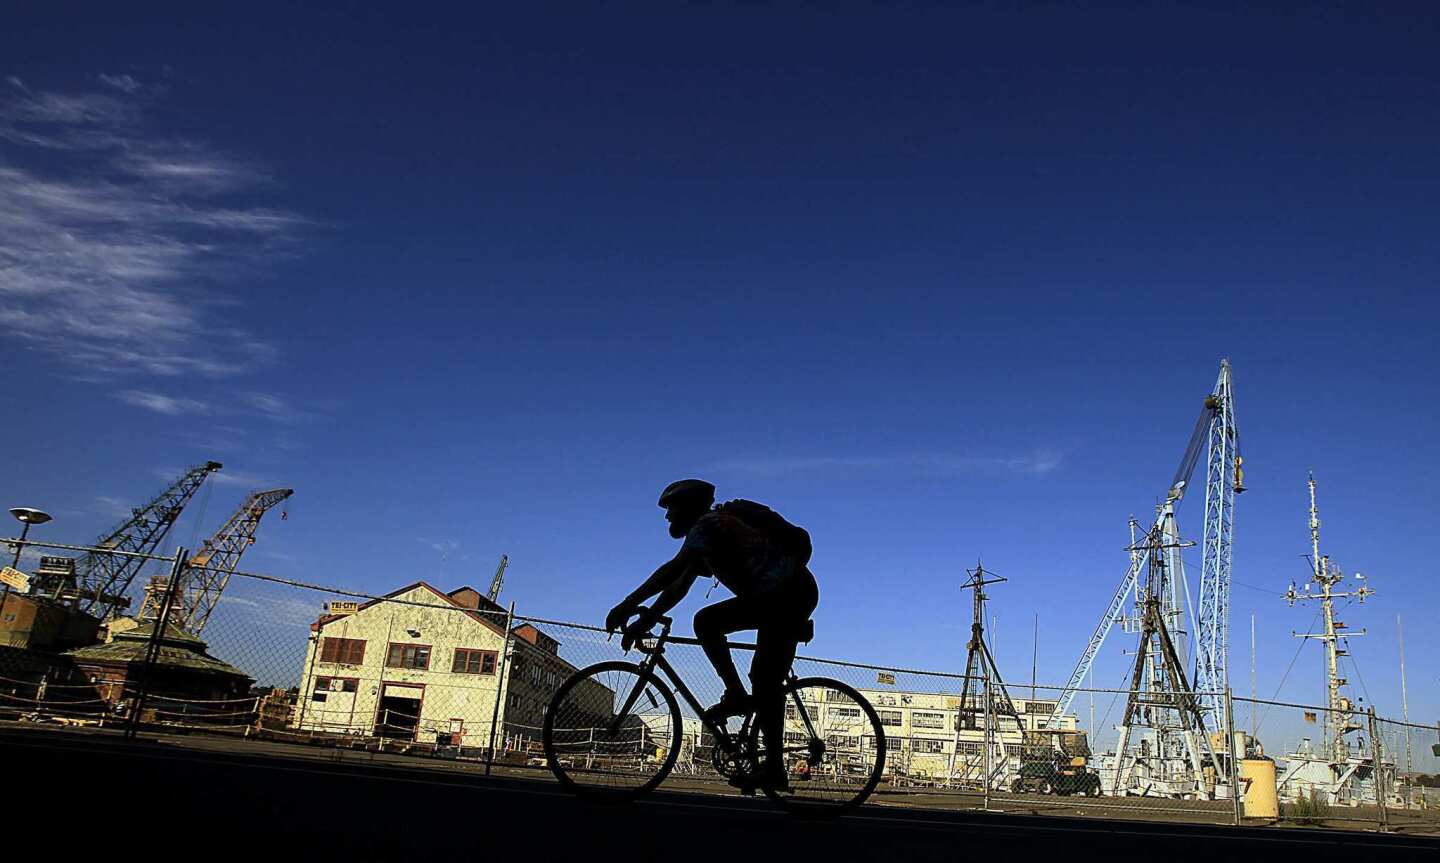 A bicyclist pedals past the shuttered Mare Island Naval Shipyard in the Bay Area community of Vallejo.